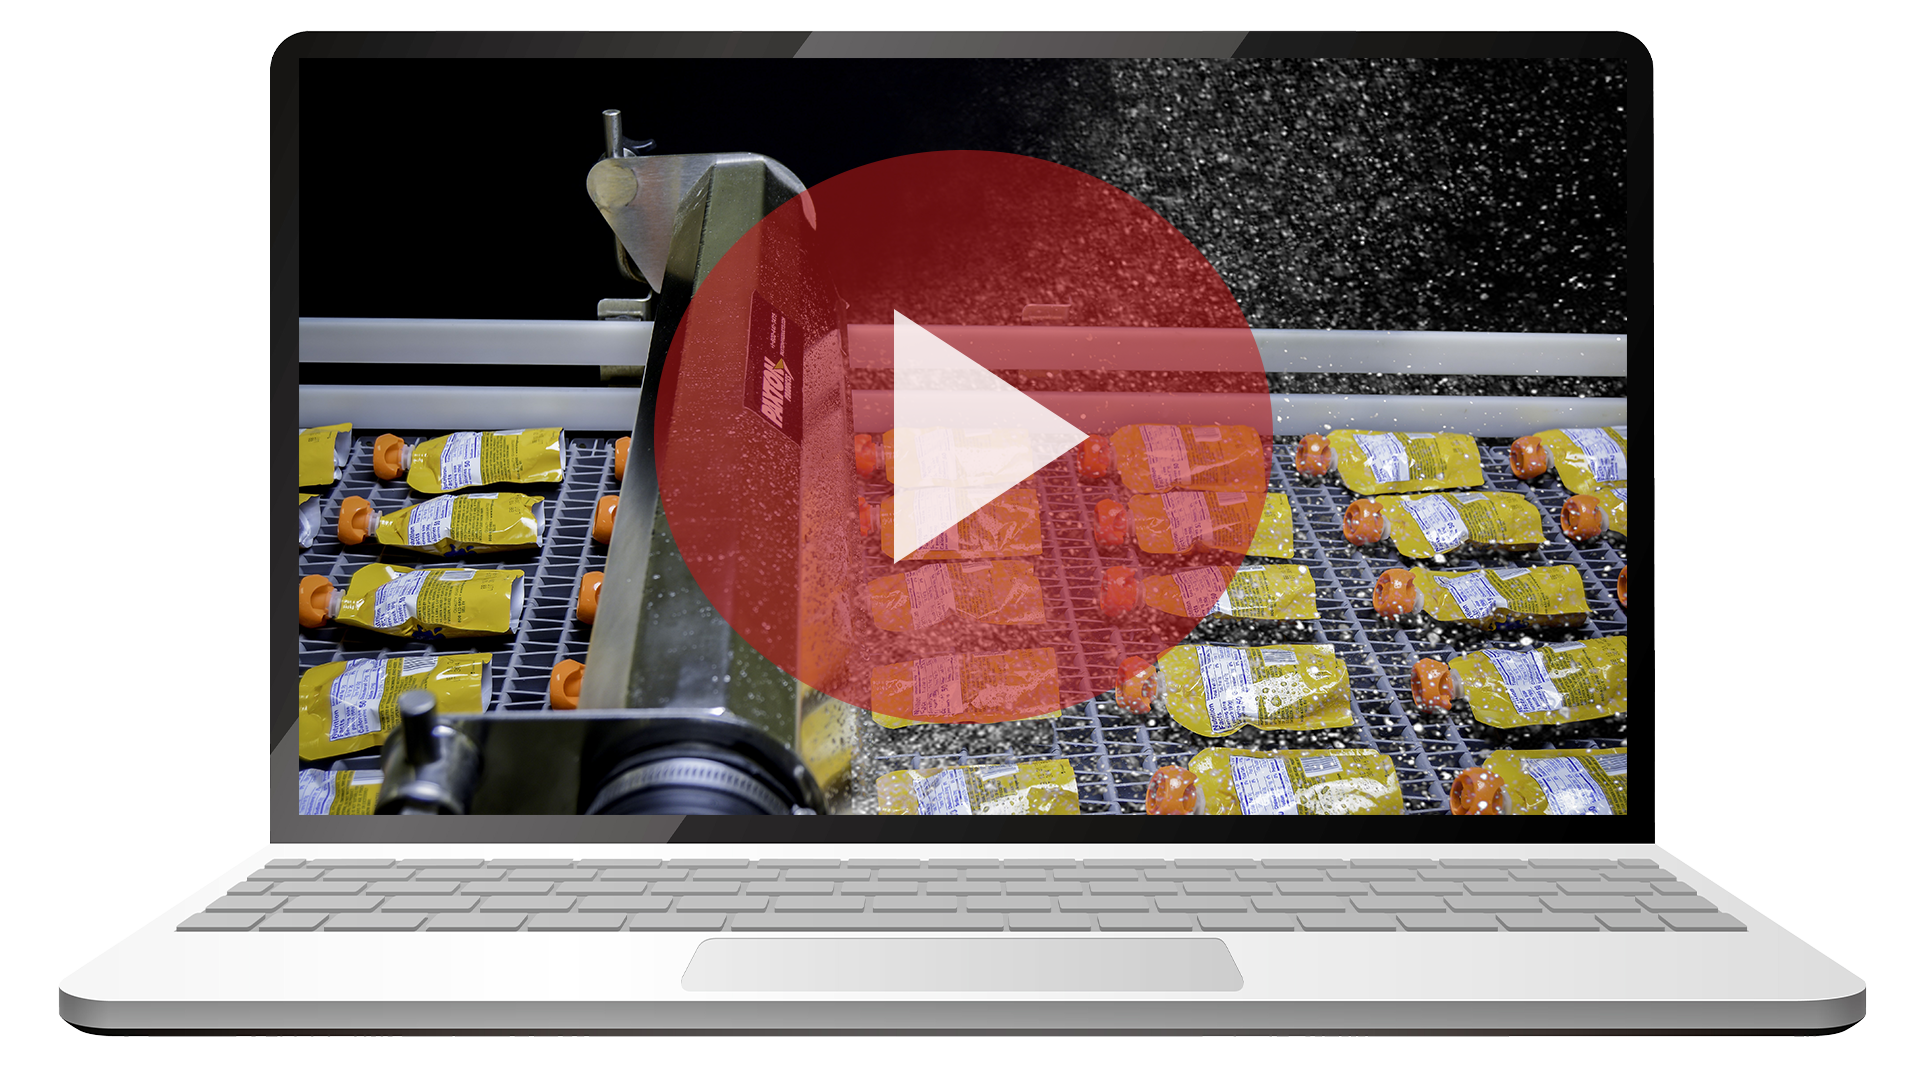 DOWNLOAD IMAGE TO VIEW: YouTube Video: Paxton's High Efficiency Pouch Drying System by Paxton Products 